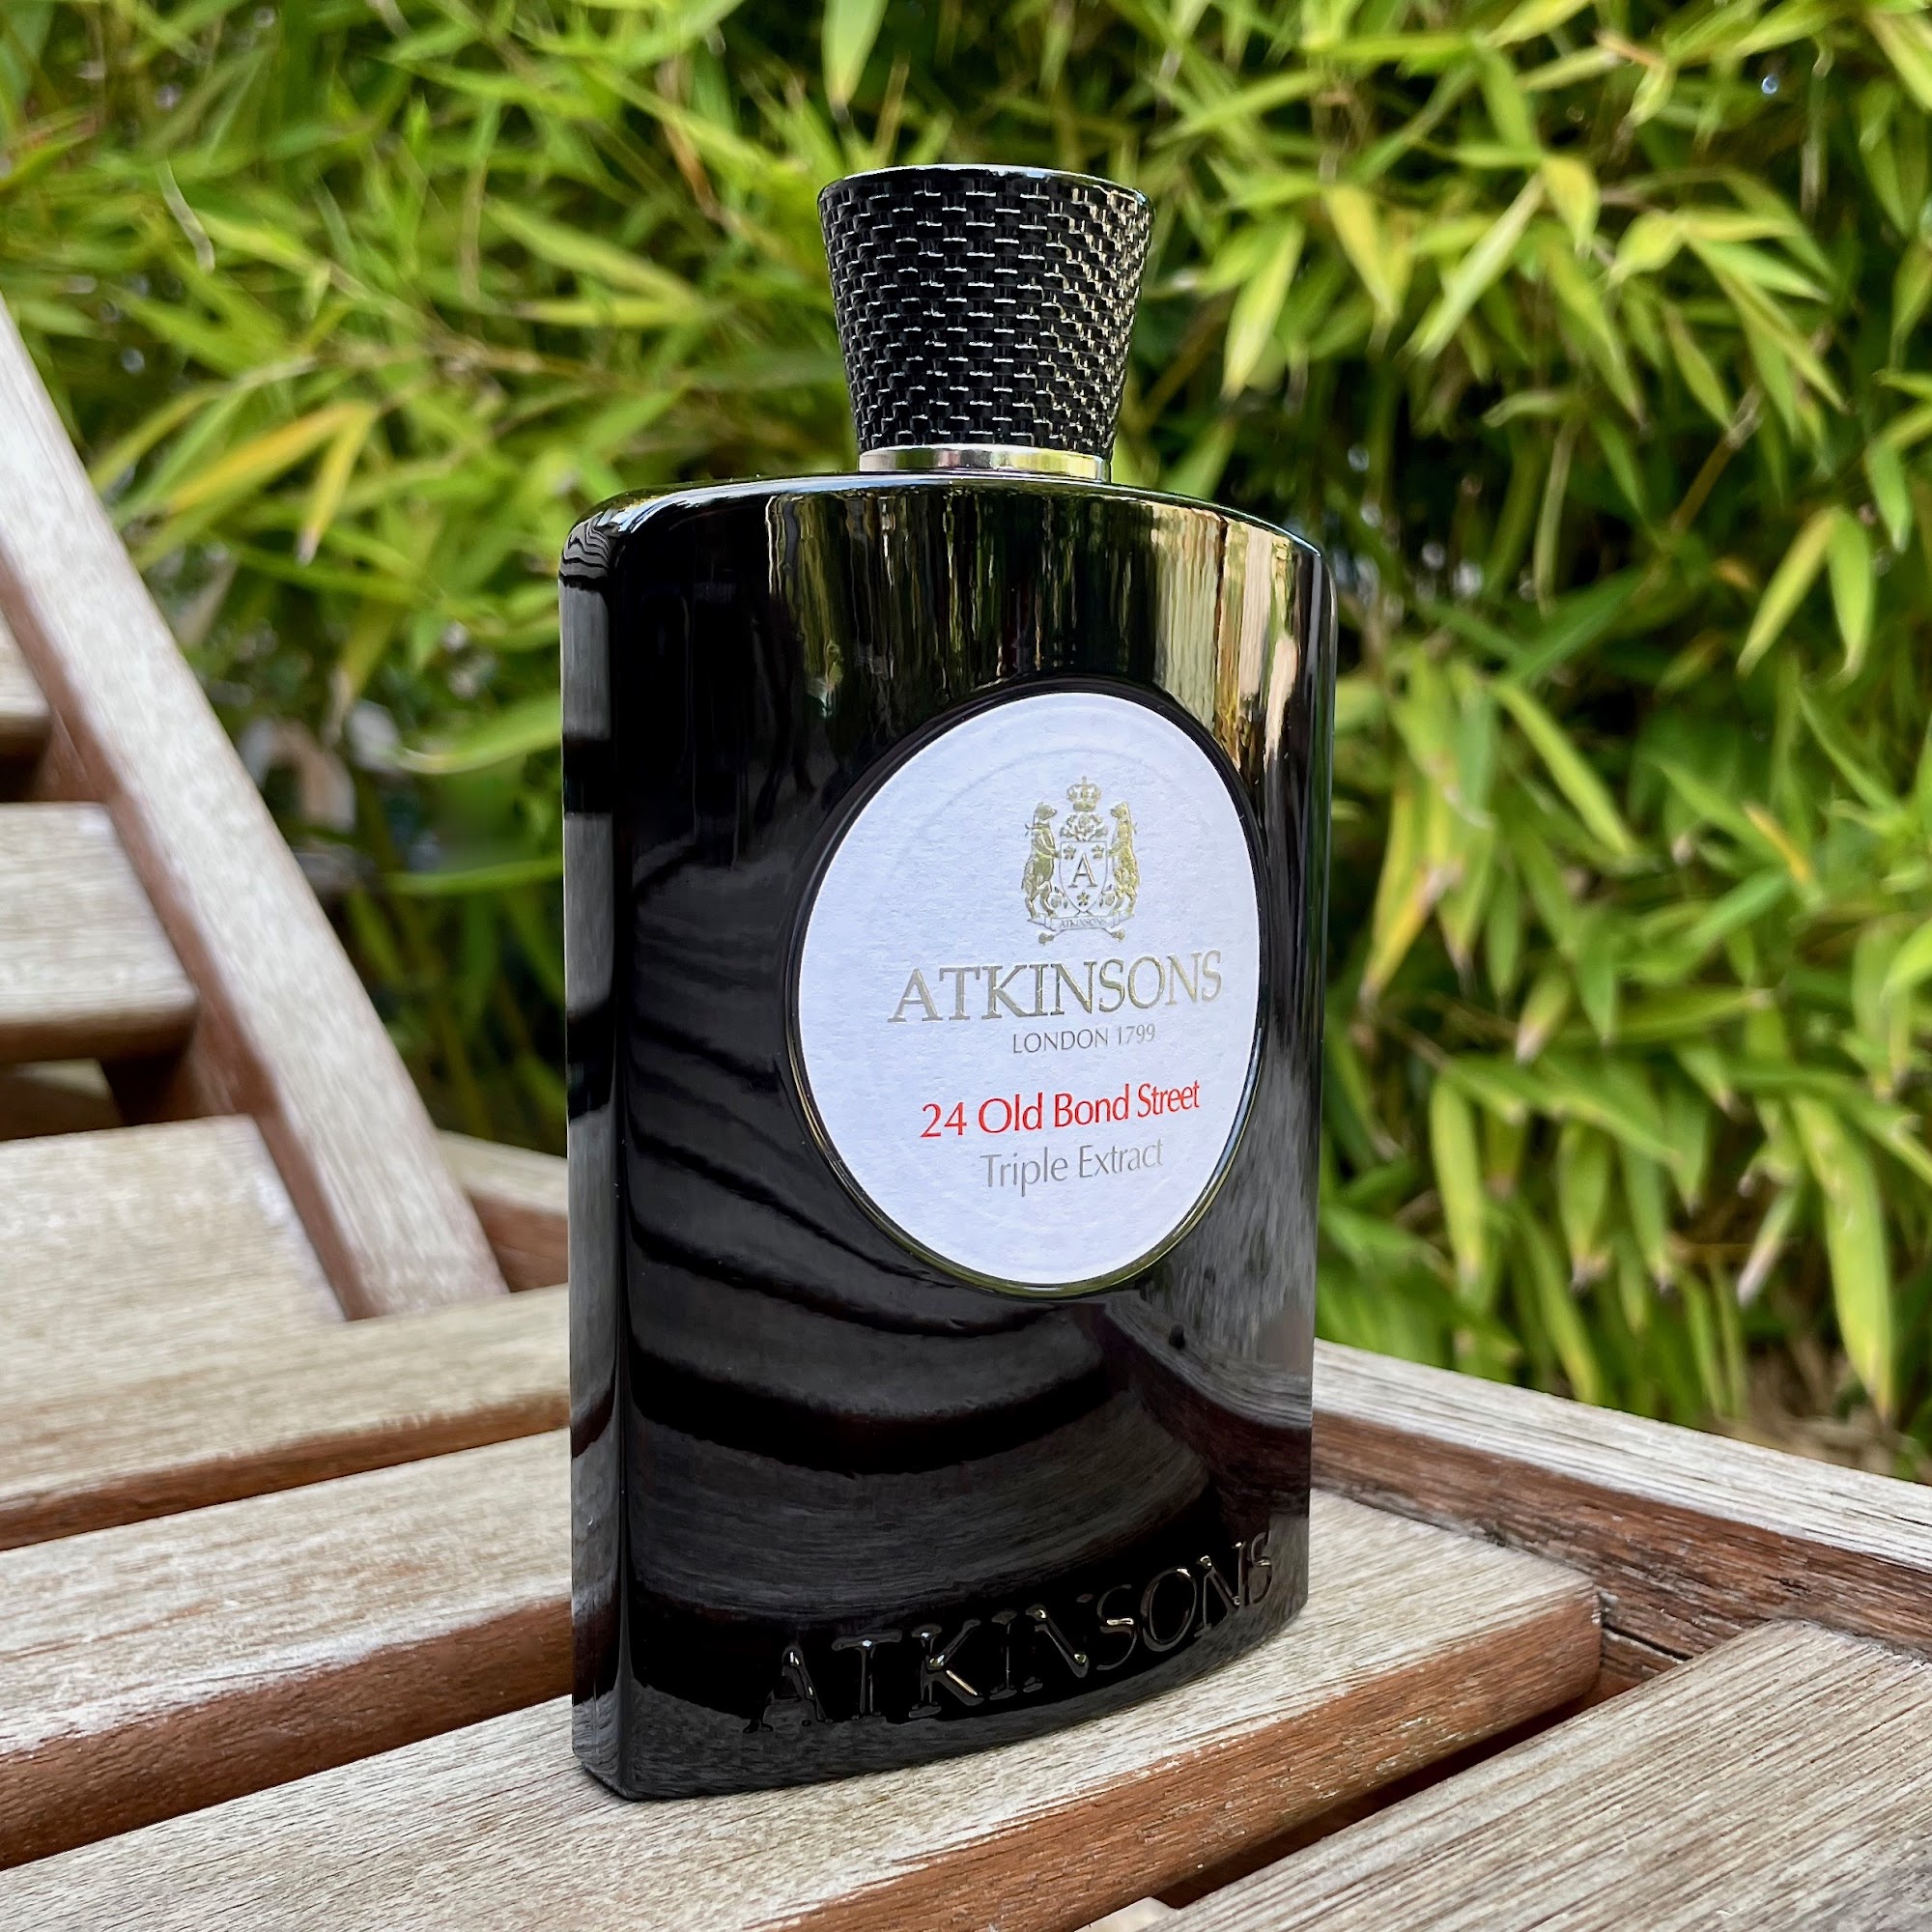 Bottle of Atkinsons 24 Old Bond Street Triple Extract Cologne